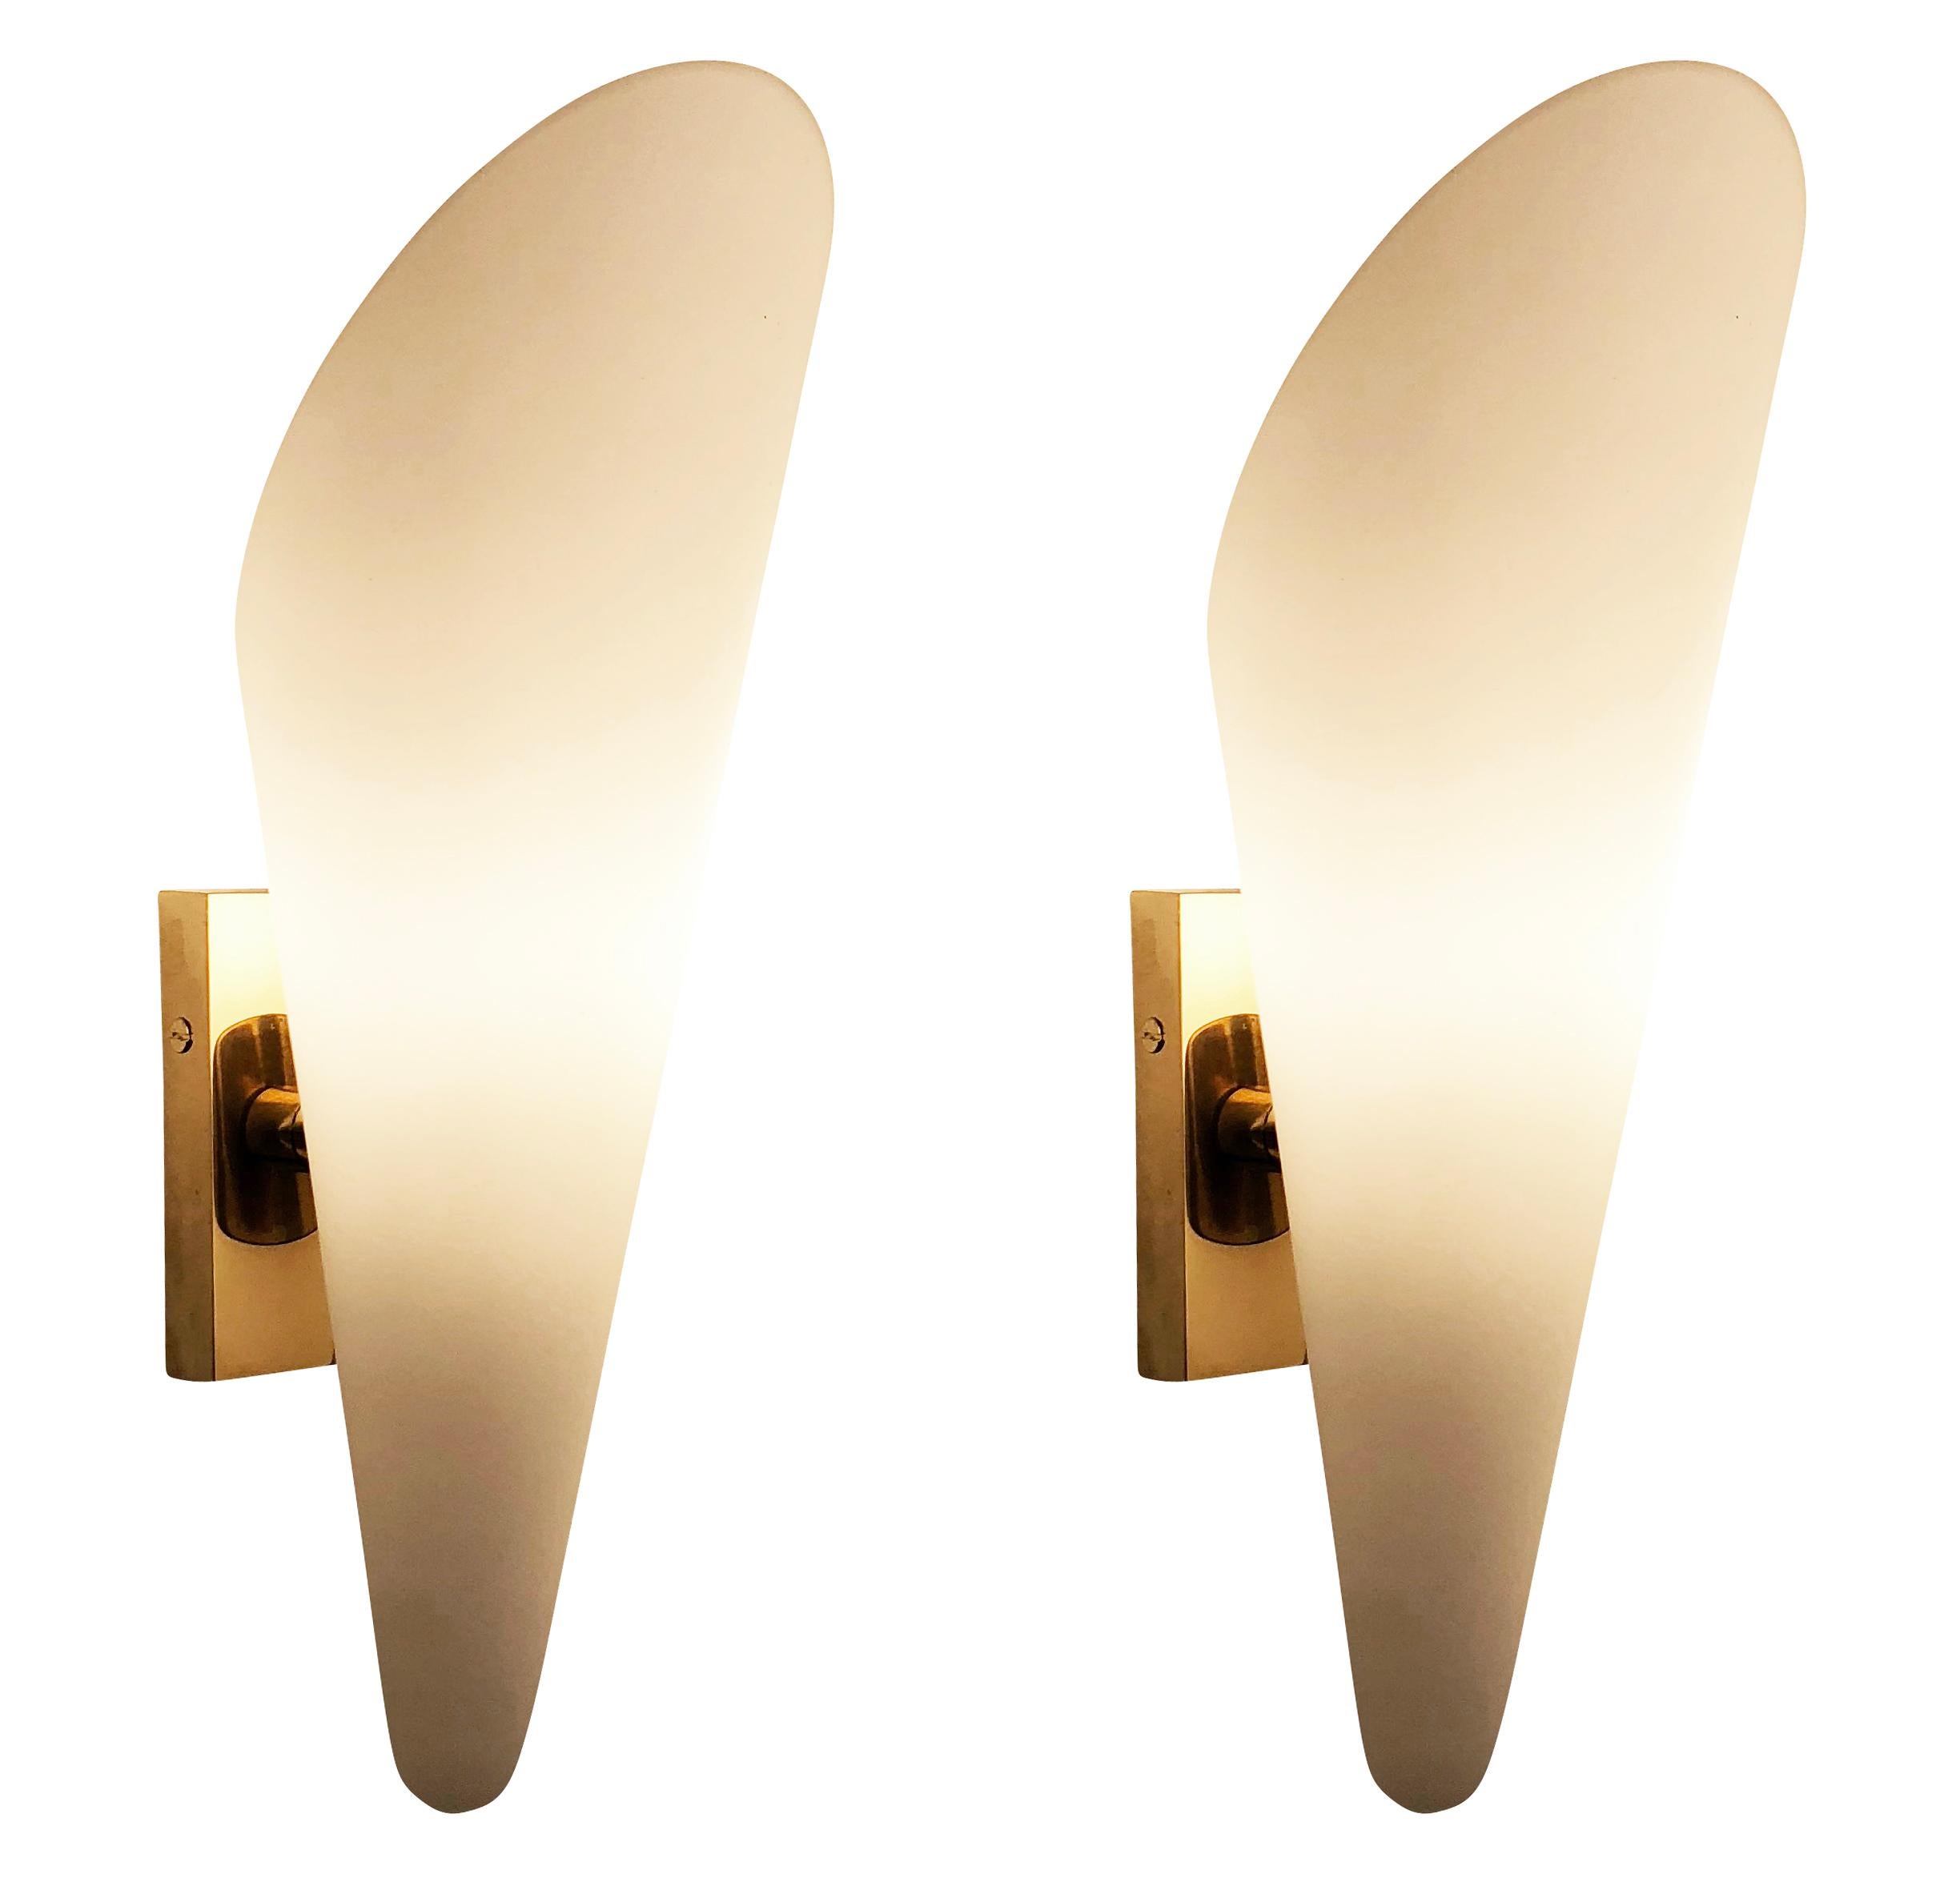 Italian midcentury sconces with conical frosted glass shades and brass hardware. One candelabra socket per light. Sold as pairs-5 pairs available. Price per pair.

Condition: Excellent vintage condition, minor wear consistent with age and